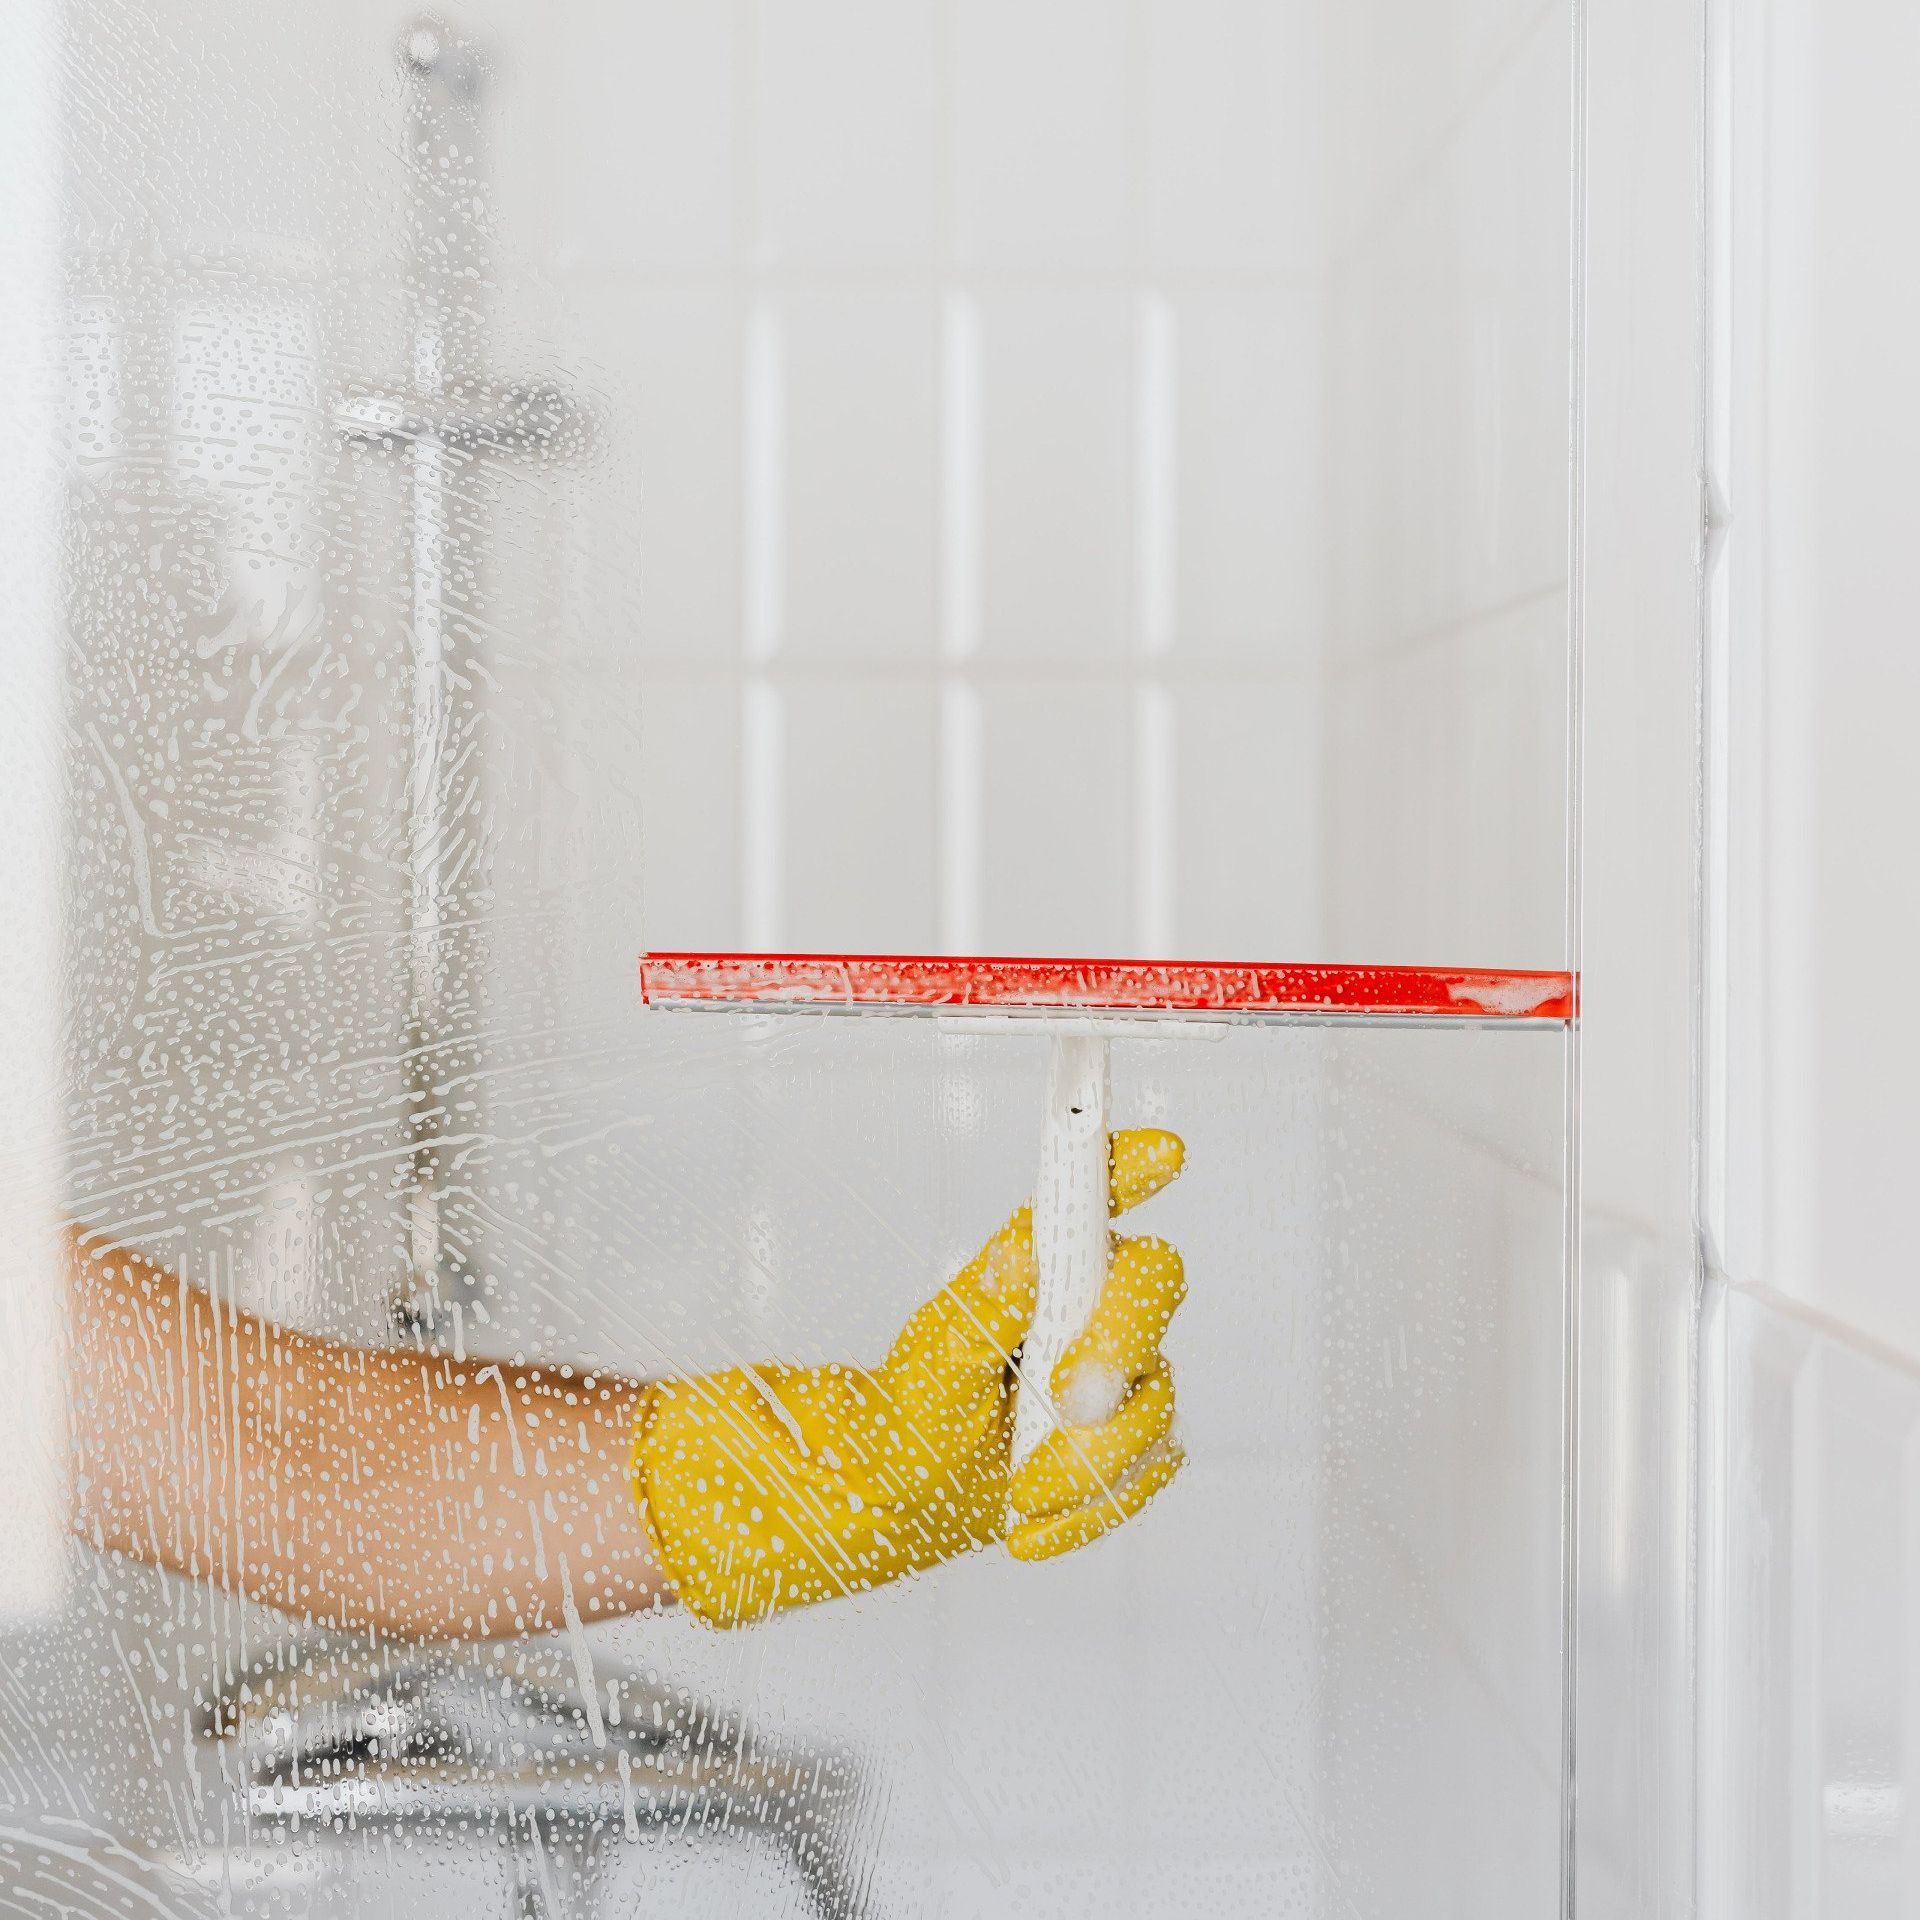 A person wearing yellow gloves is cleaning a shower door with a squeegee.